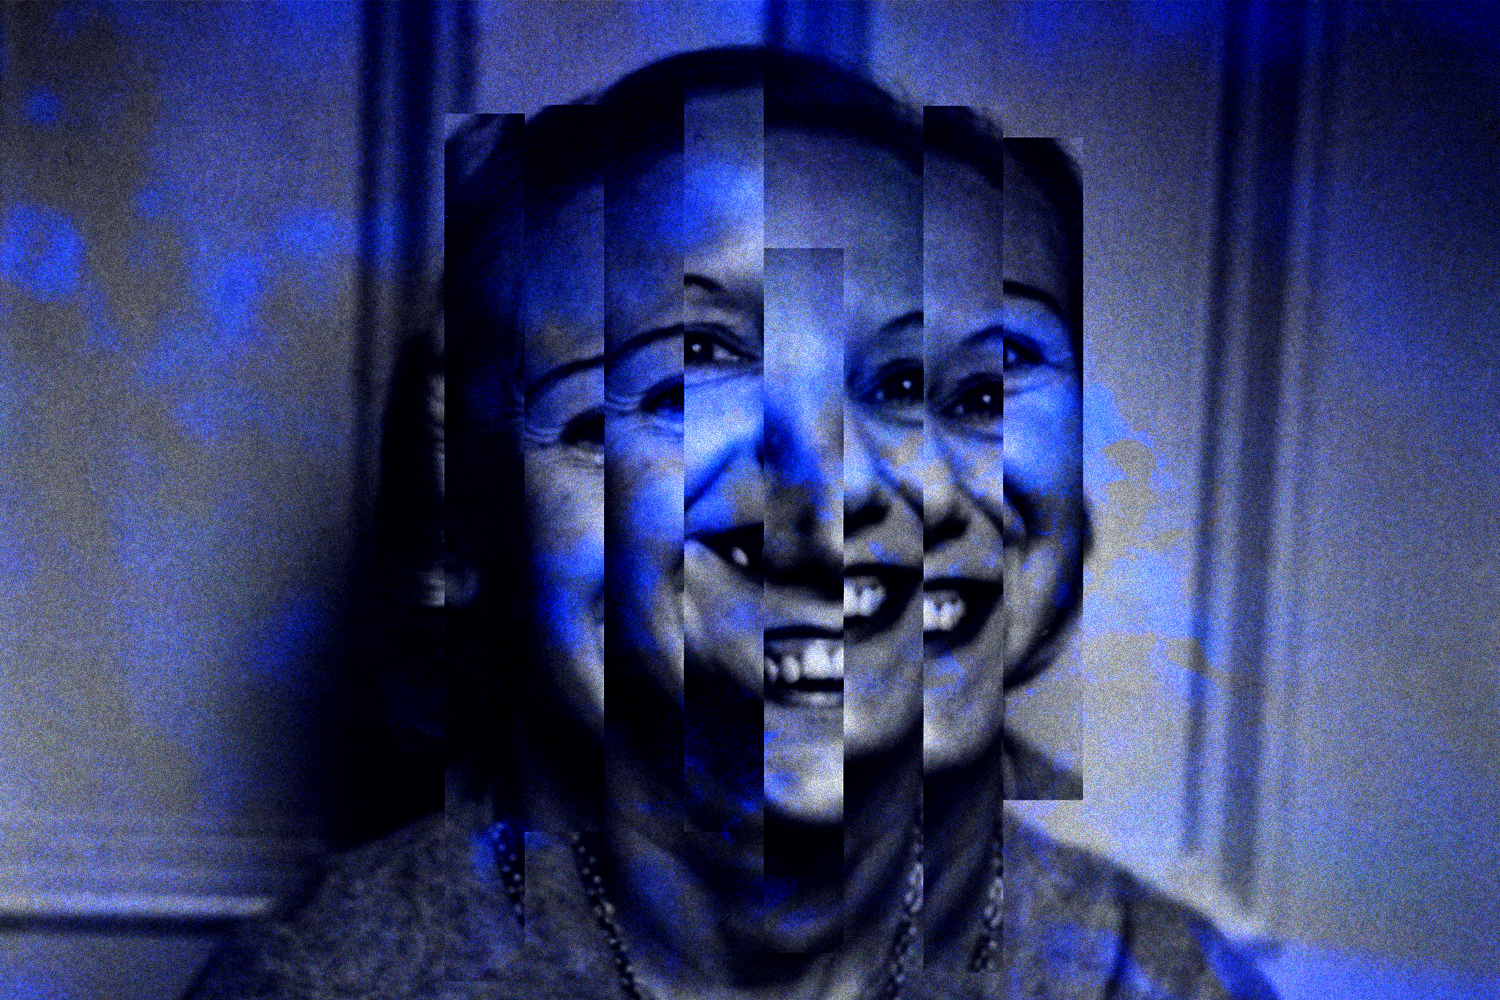 Image: A photo of Anna Kavan smiling in greyscale and blues, rectangular fractions of her face disjointed. Image by Ryan Edmund Thiel.